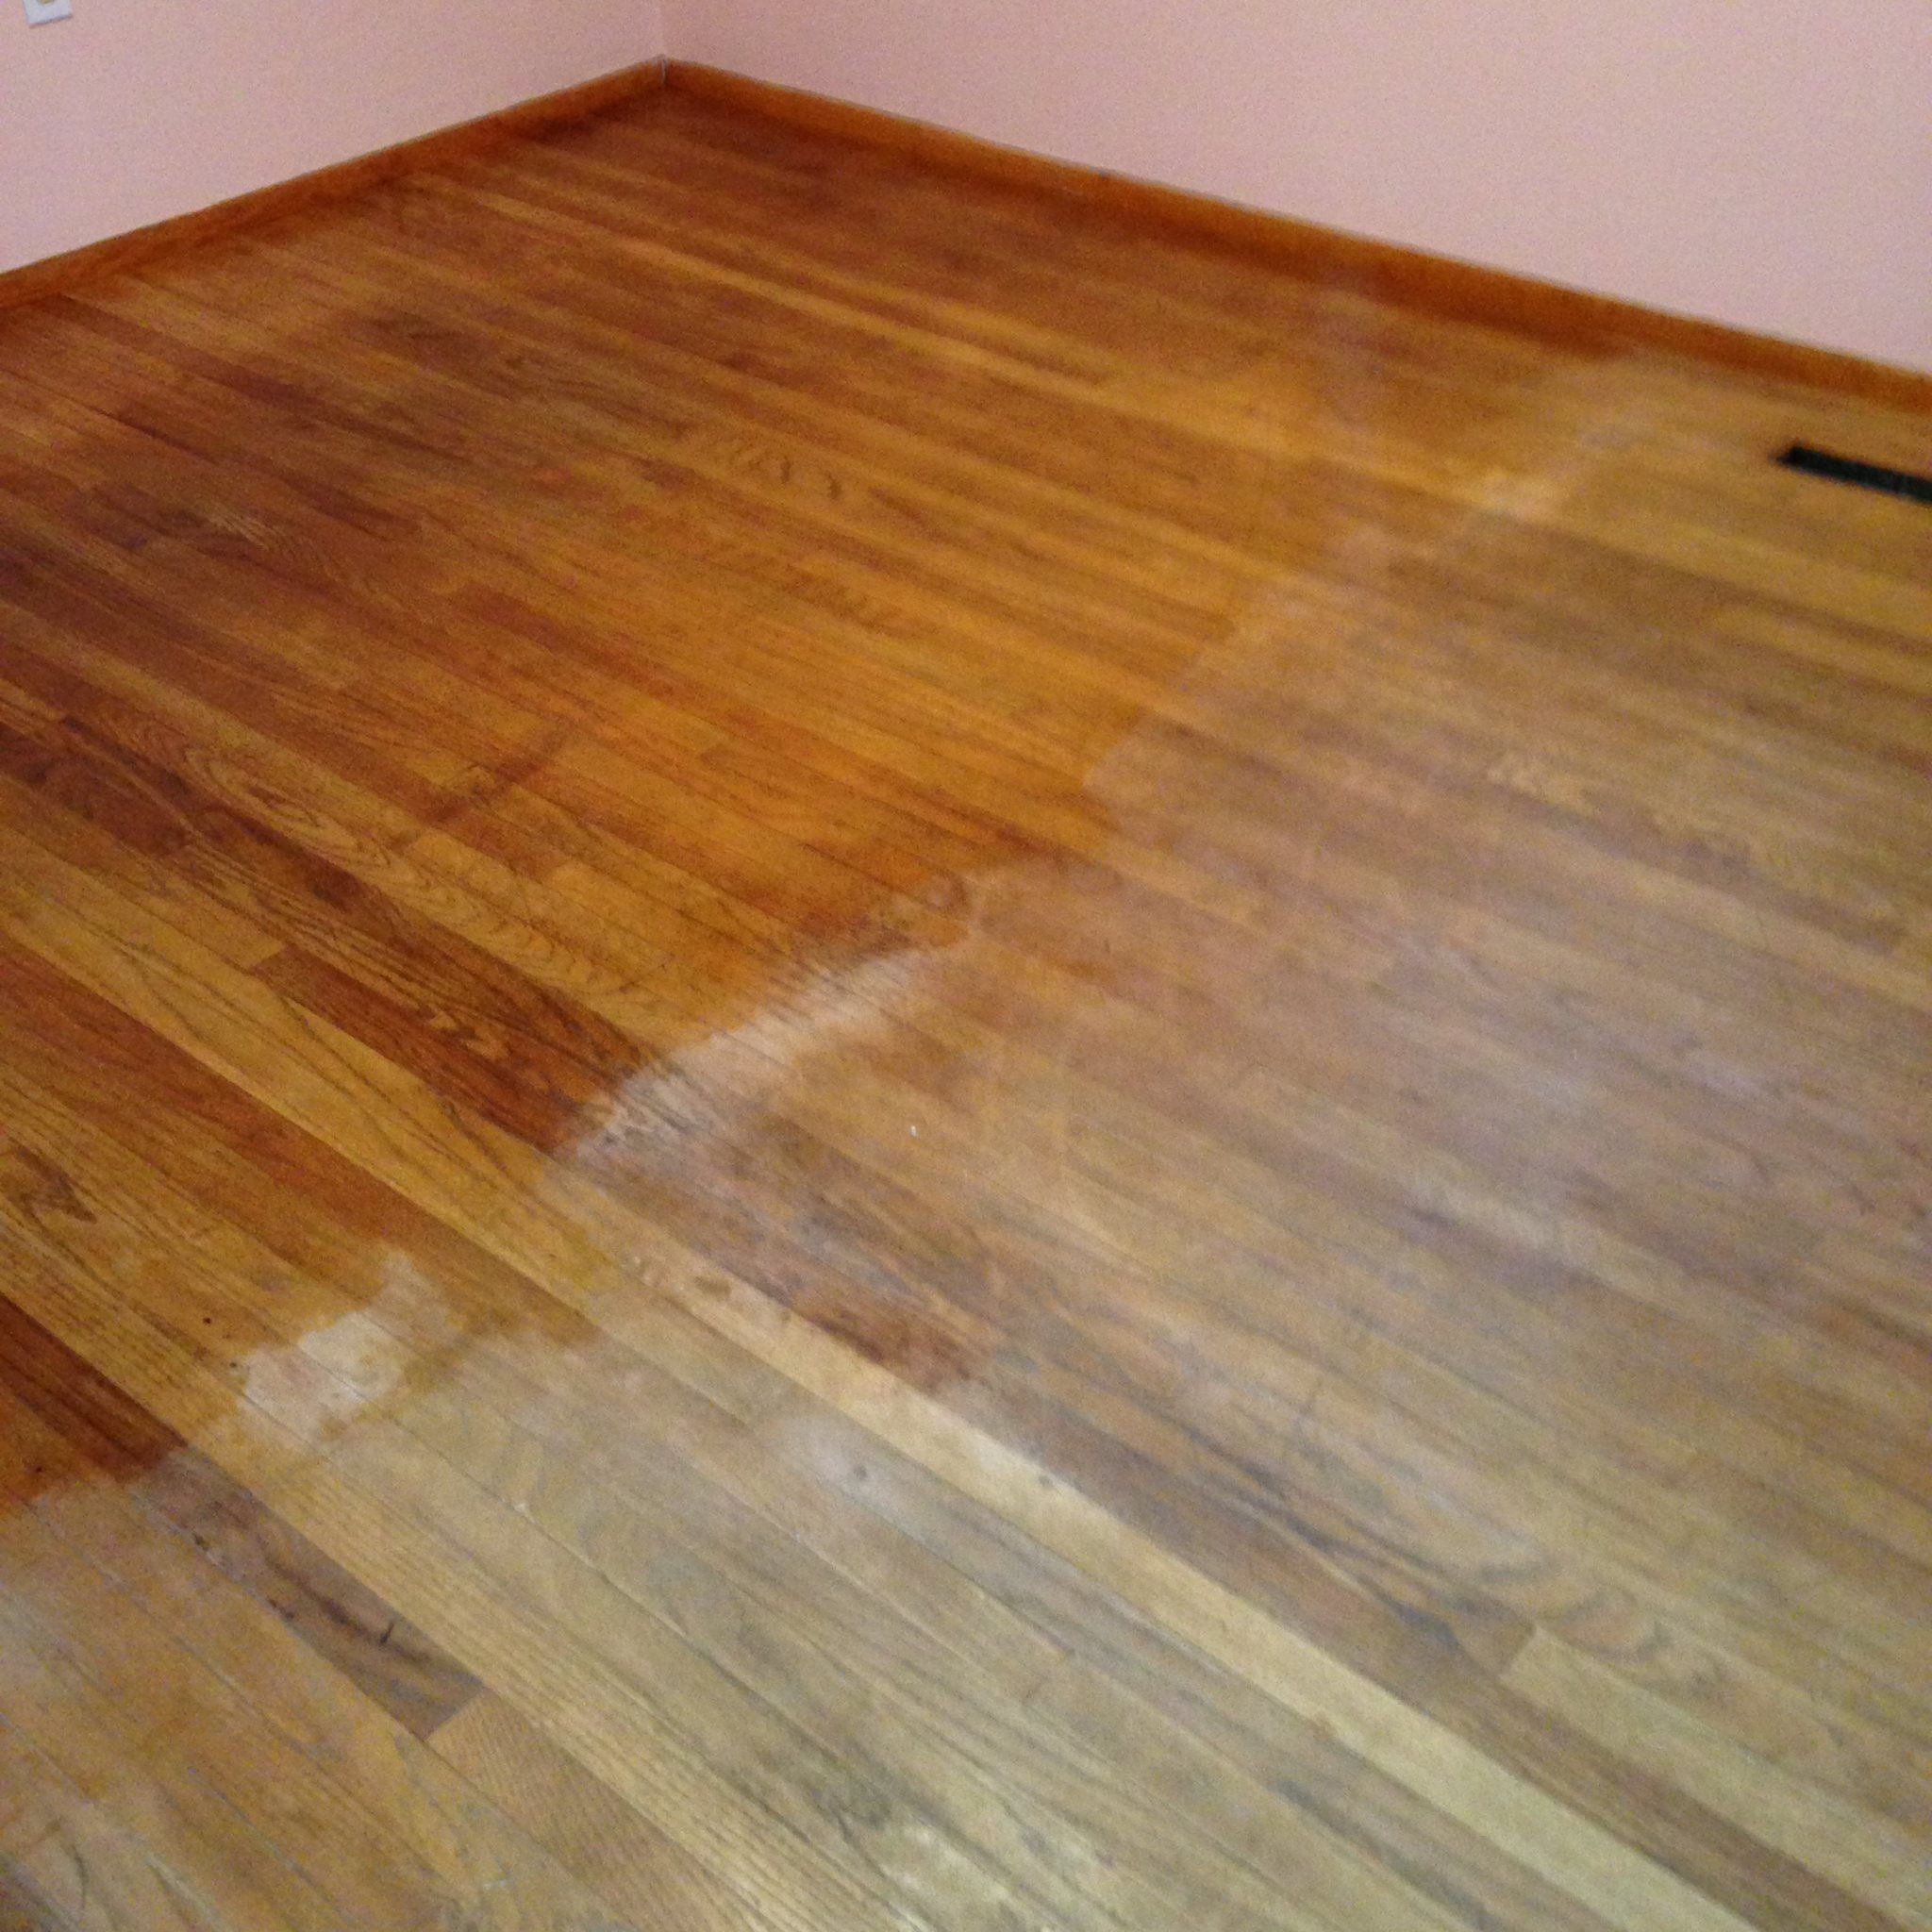 20 Unique How Much Does It Cost to Refinish Hardwood Floors 2024 free download how much does it cost to refinish hardwood floors of image 6559 from post restoring old hardwood floors will with in wood floor hacks every homeowner needs know painting small restoring old 